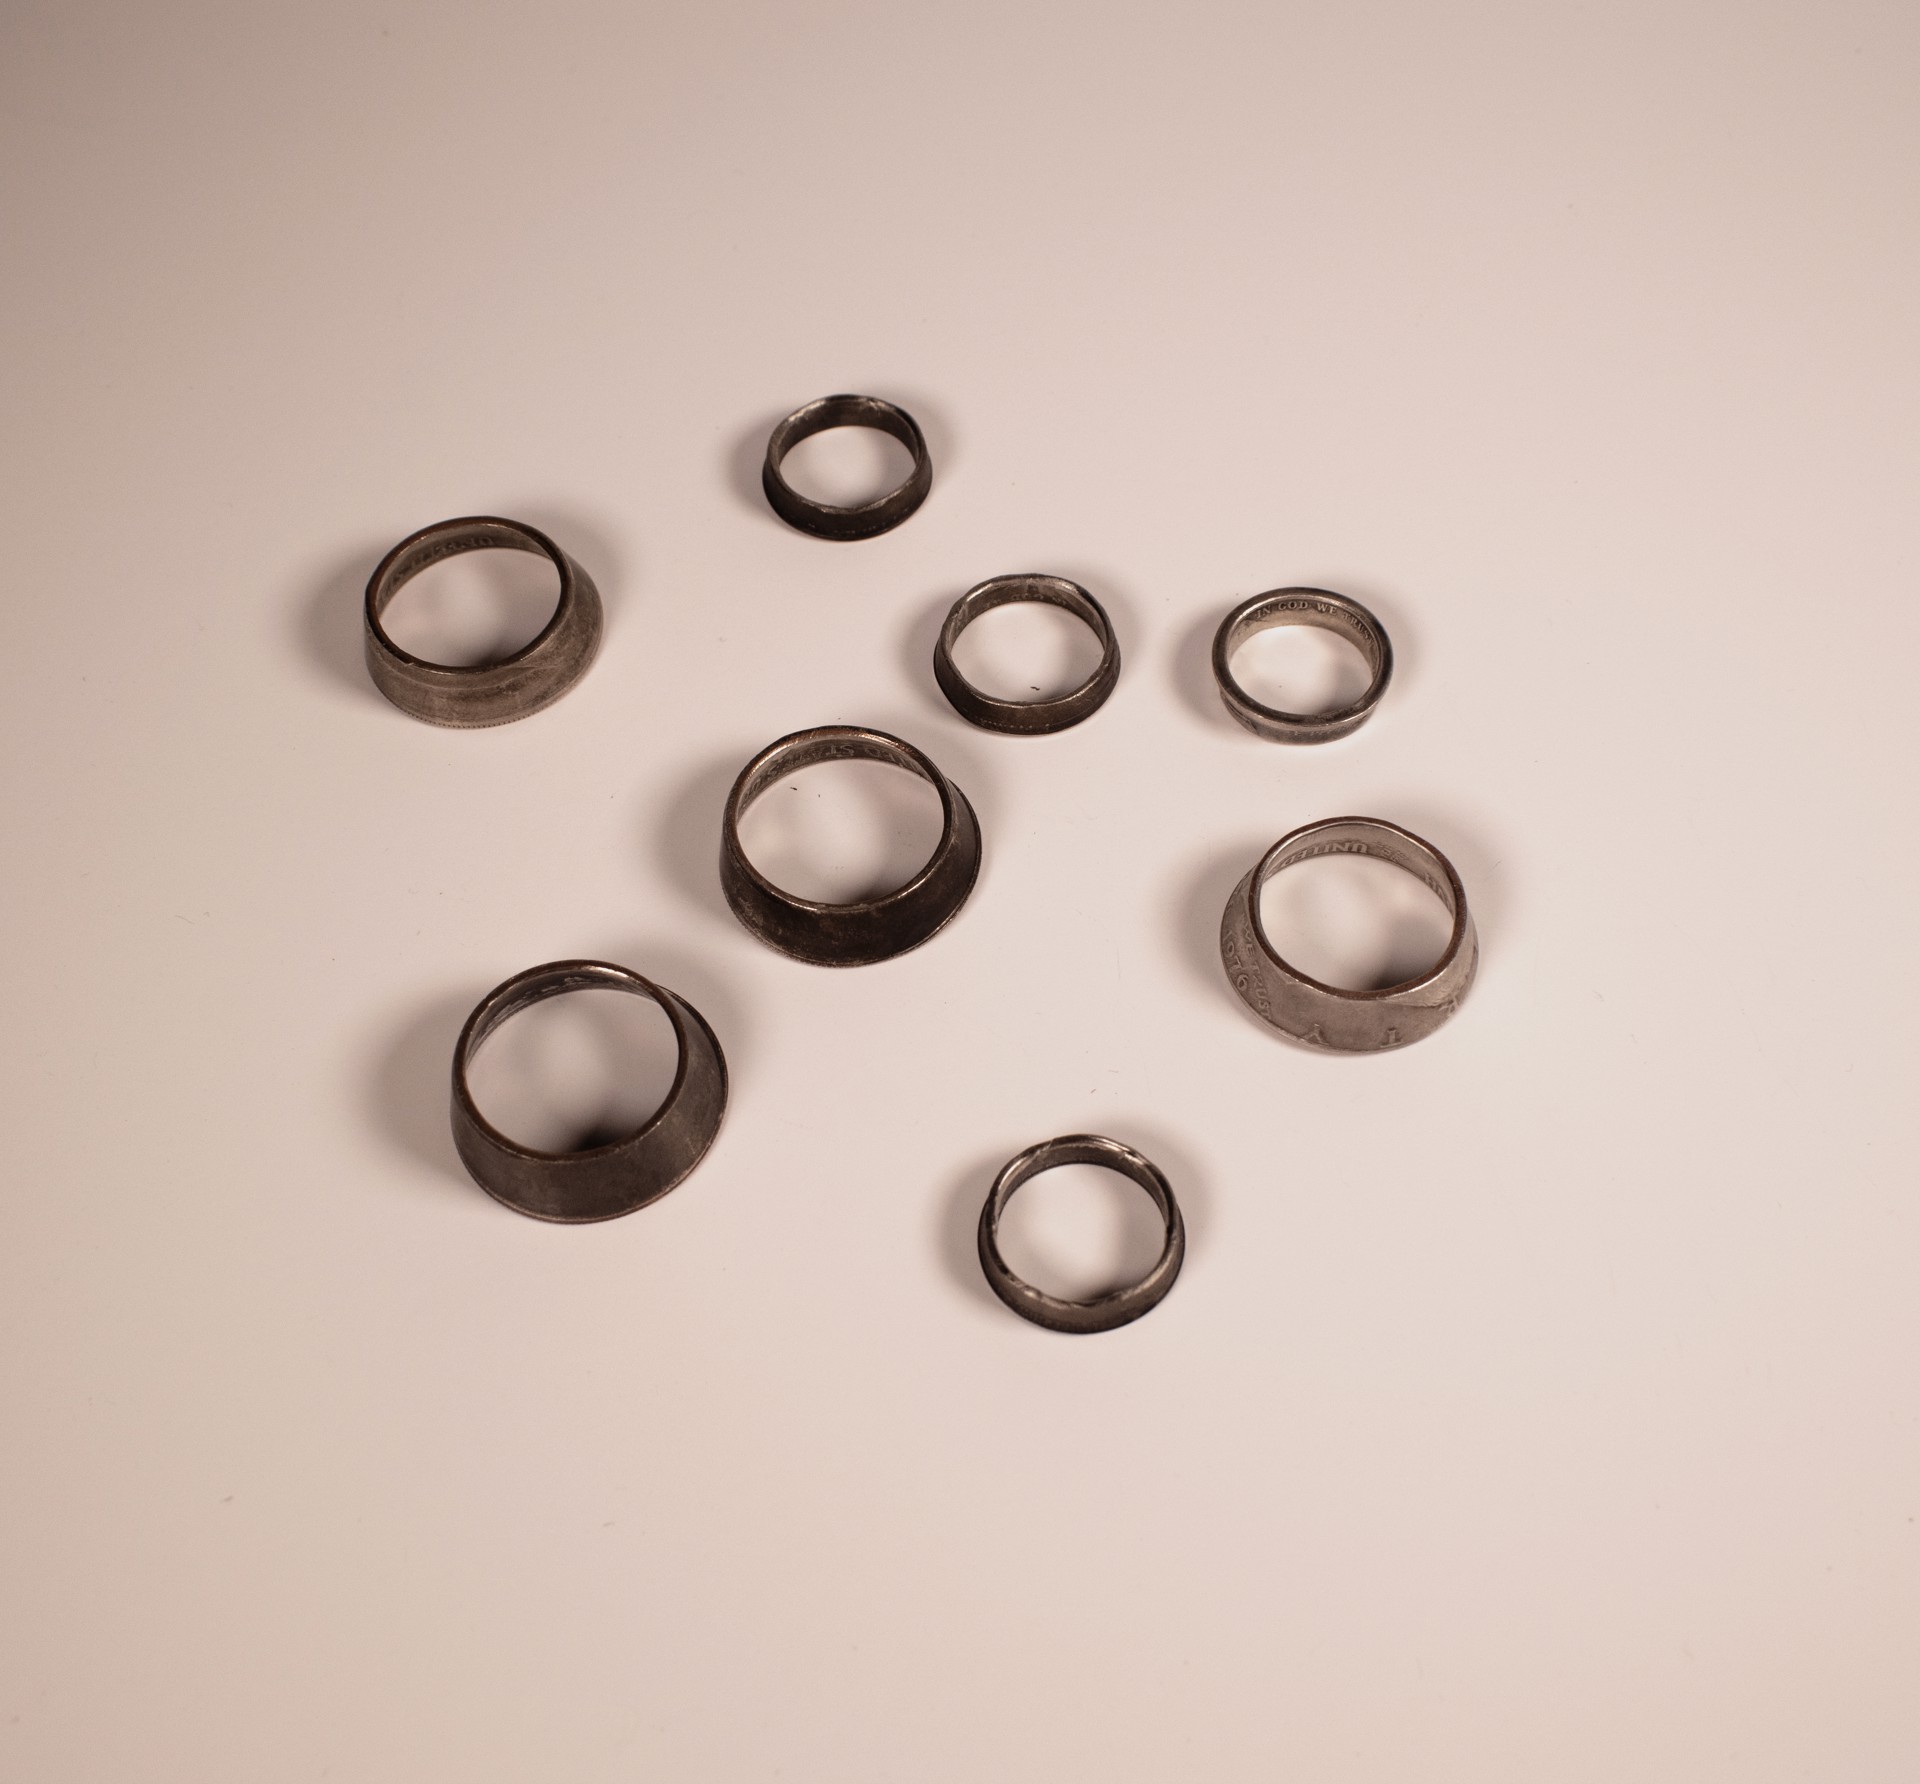 Rings by Jared Rem